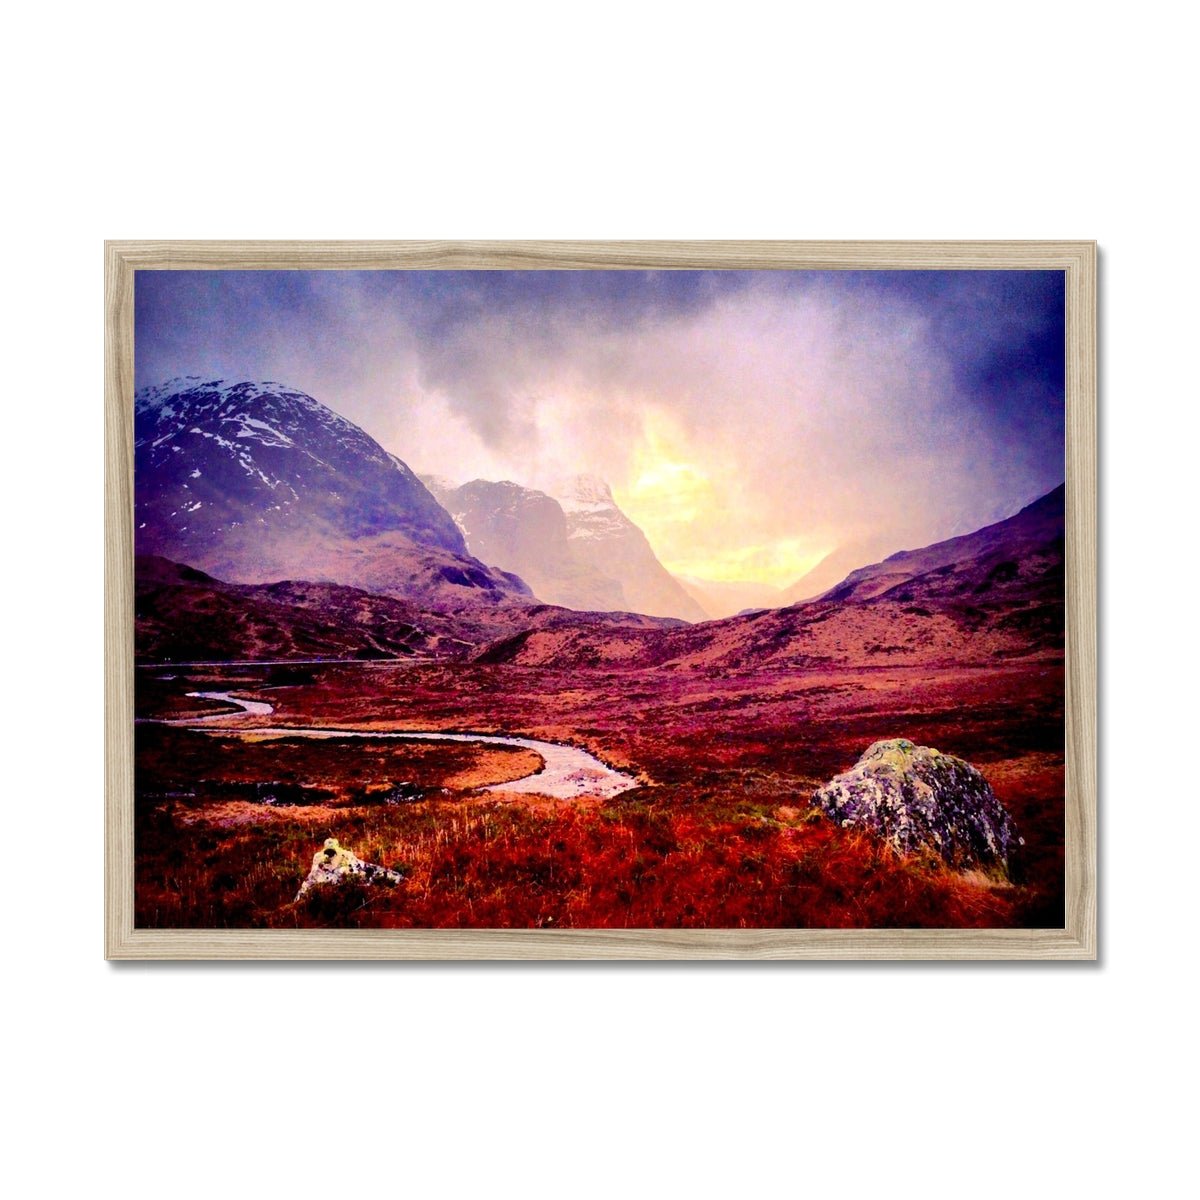 A Brooding Glencoe Painting | Framed Prints From Scotland-Framed Prints-Glencoe Art Gallery-A2 Landscape-Natural Frame-Paintings, Prints, Homeware, Art Gifts From Scotland By Scottish Artist Kevin Hunter